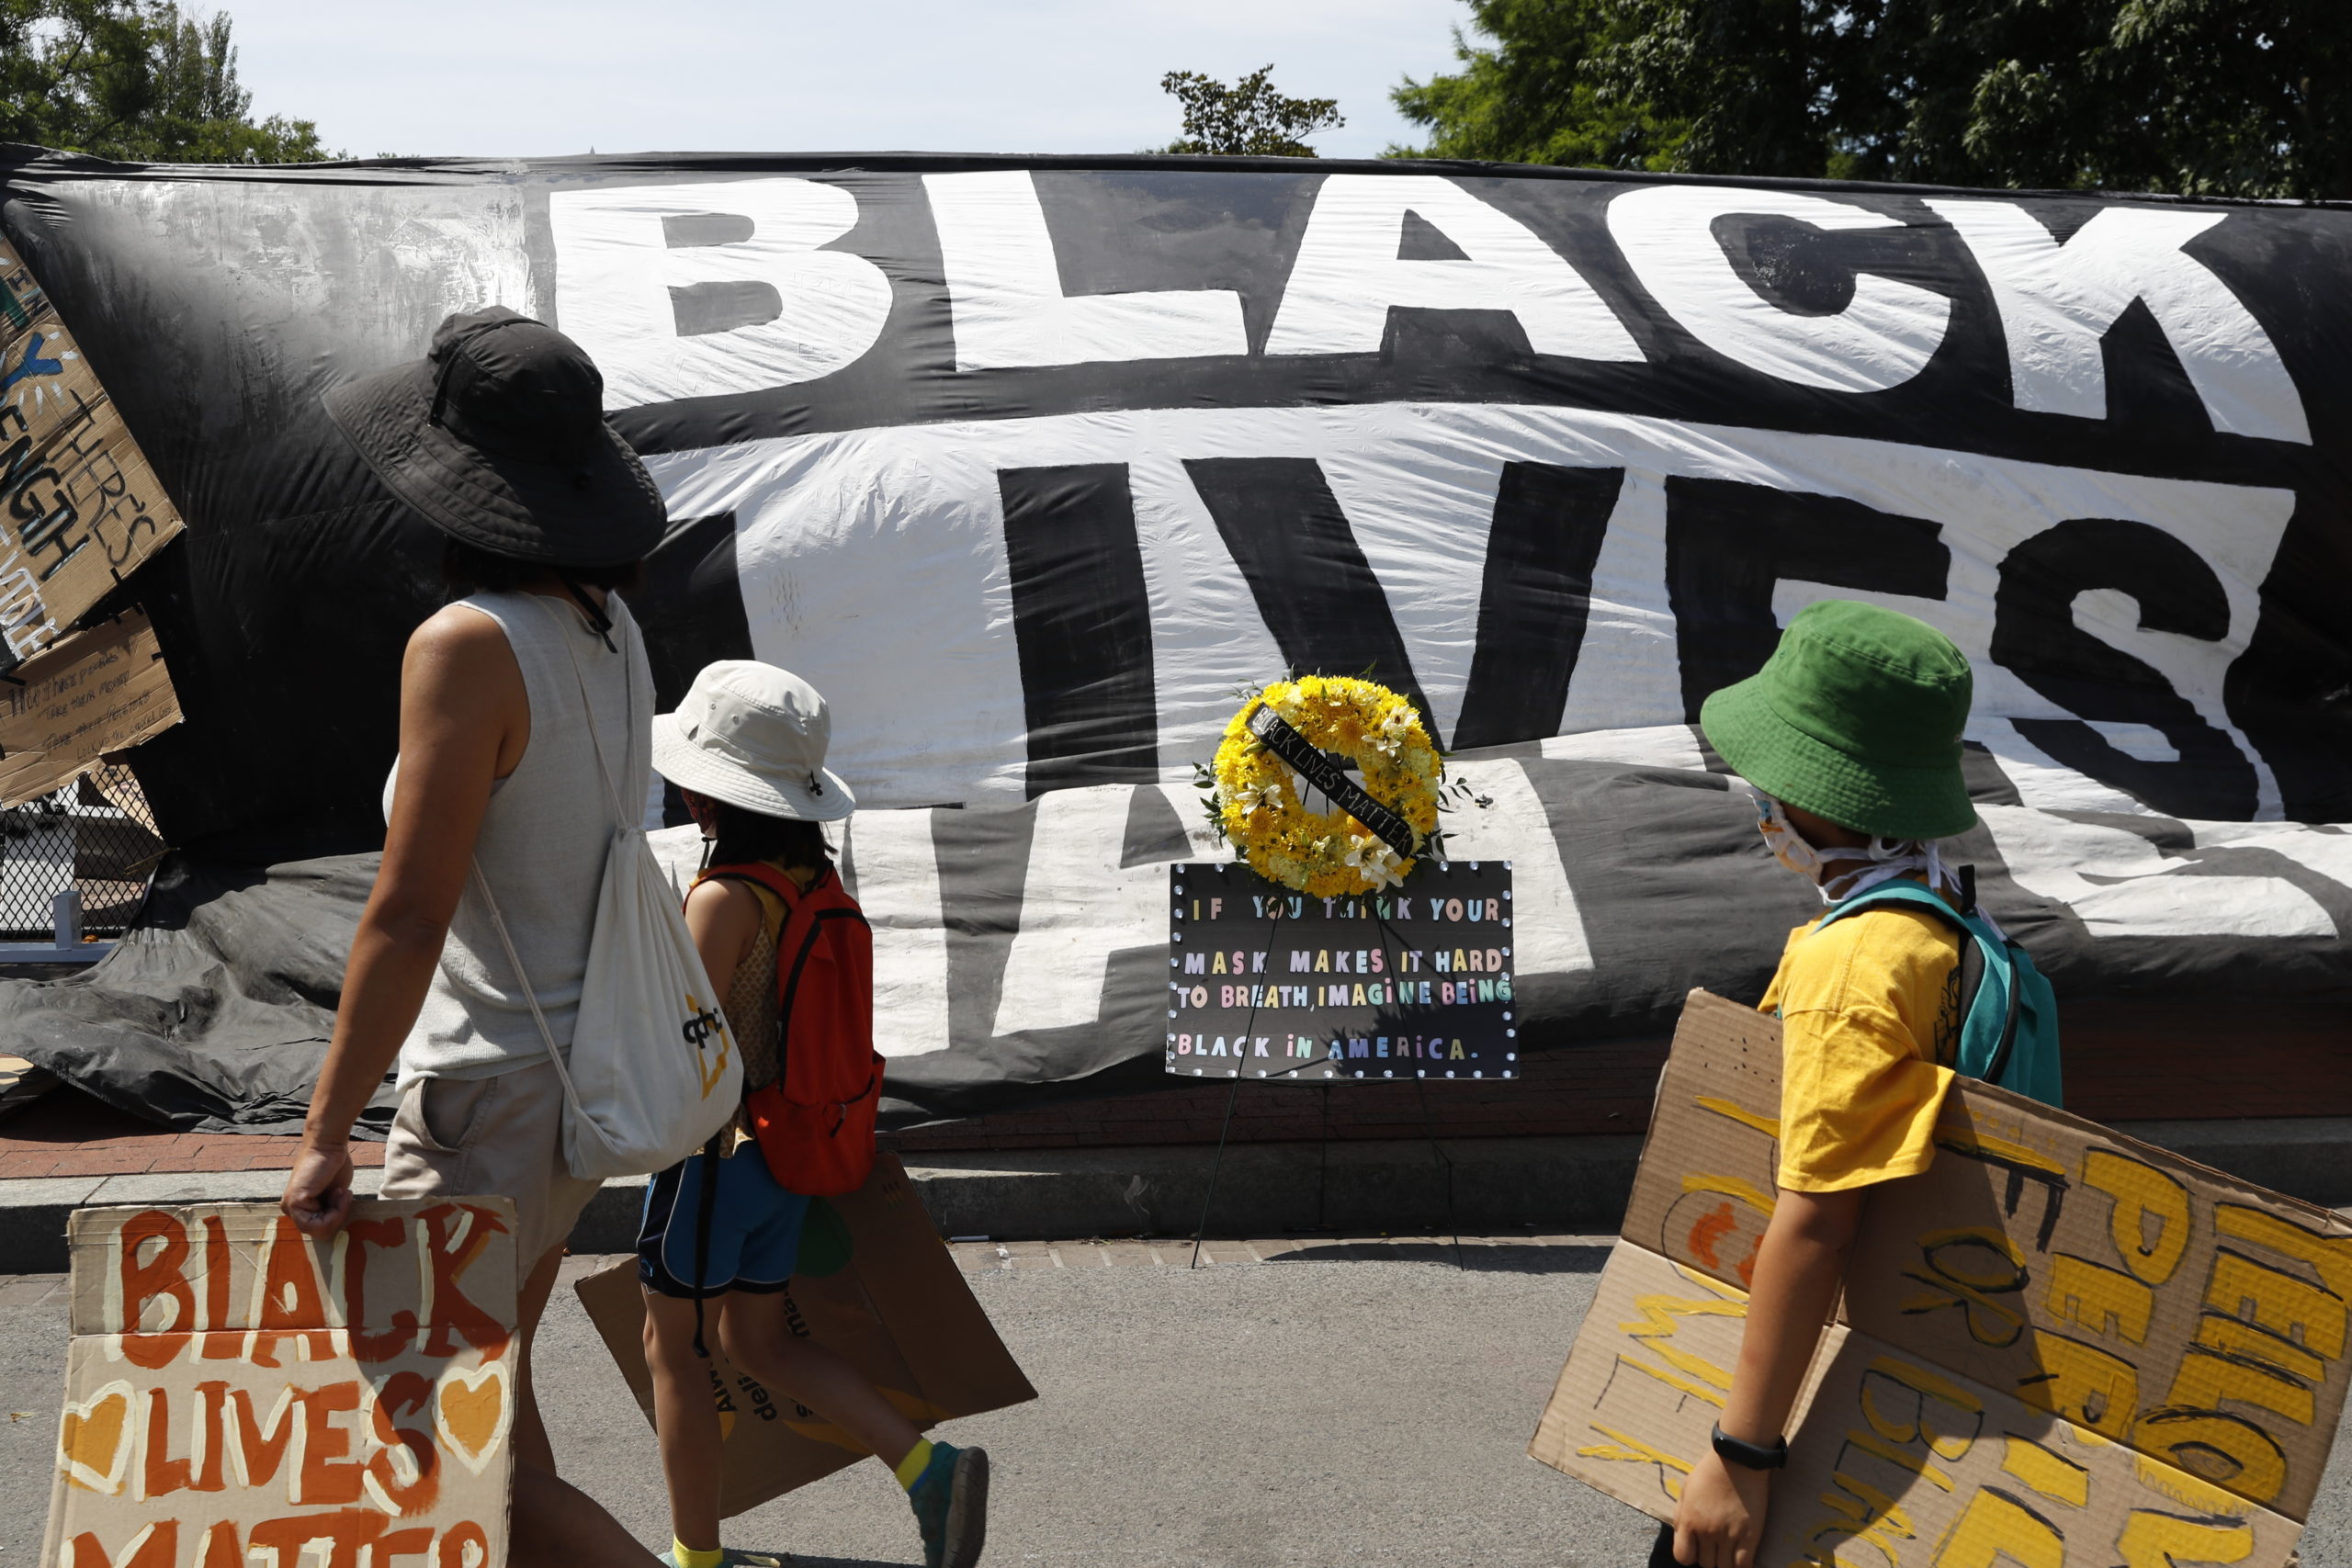 Demonstrators walk Tuesday, June 9, 2020, near the White House in Washington, past a large banner that reads Black Lives Matter, hanging on a fence at 16th and H Street, after days of protests over the death of George Floyd, a black man who was in police custody in Minneapolis. Floyd died after being restrained by Minneapolis police officers. (AP Photo/Jacquelyn Martin)